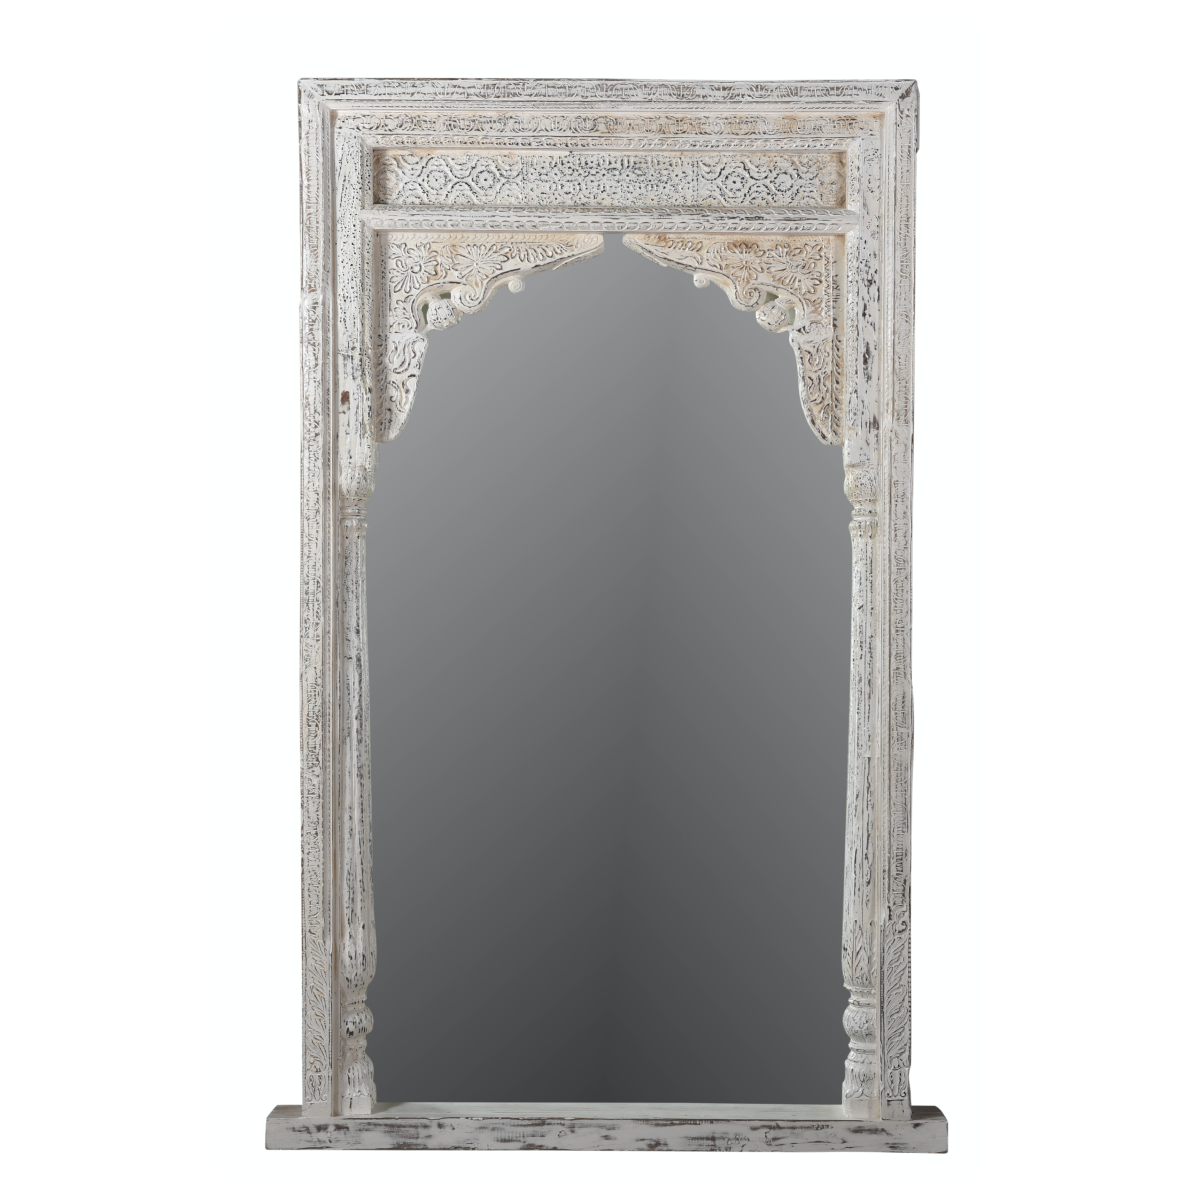 Carved Indian Arched Mirror in Aged White